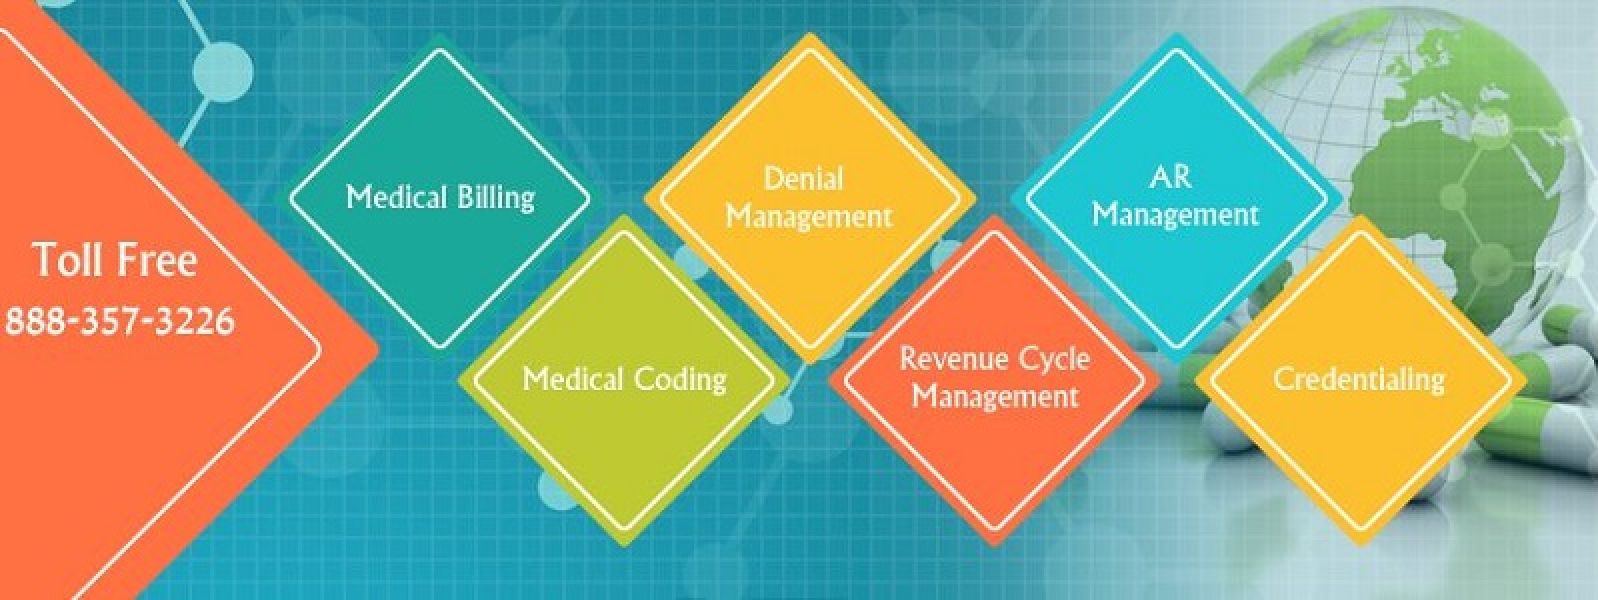 Medical billing services in Abbeville, Louisiana